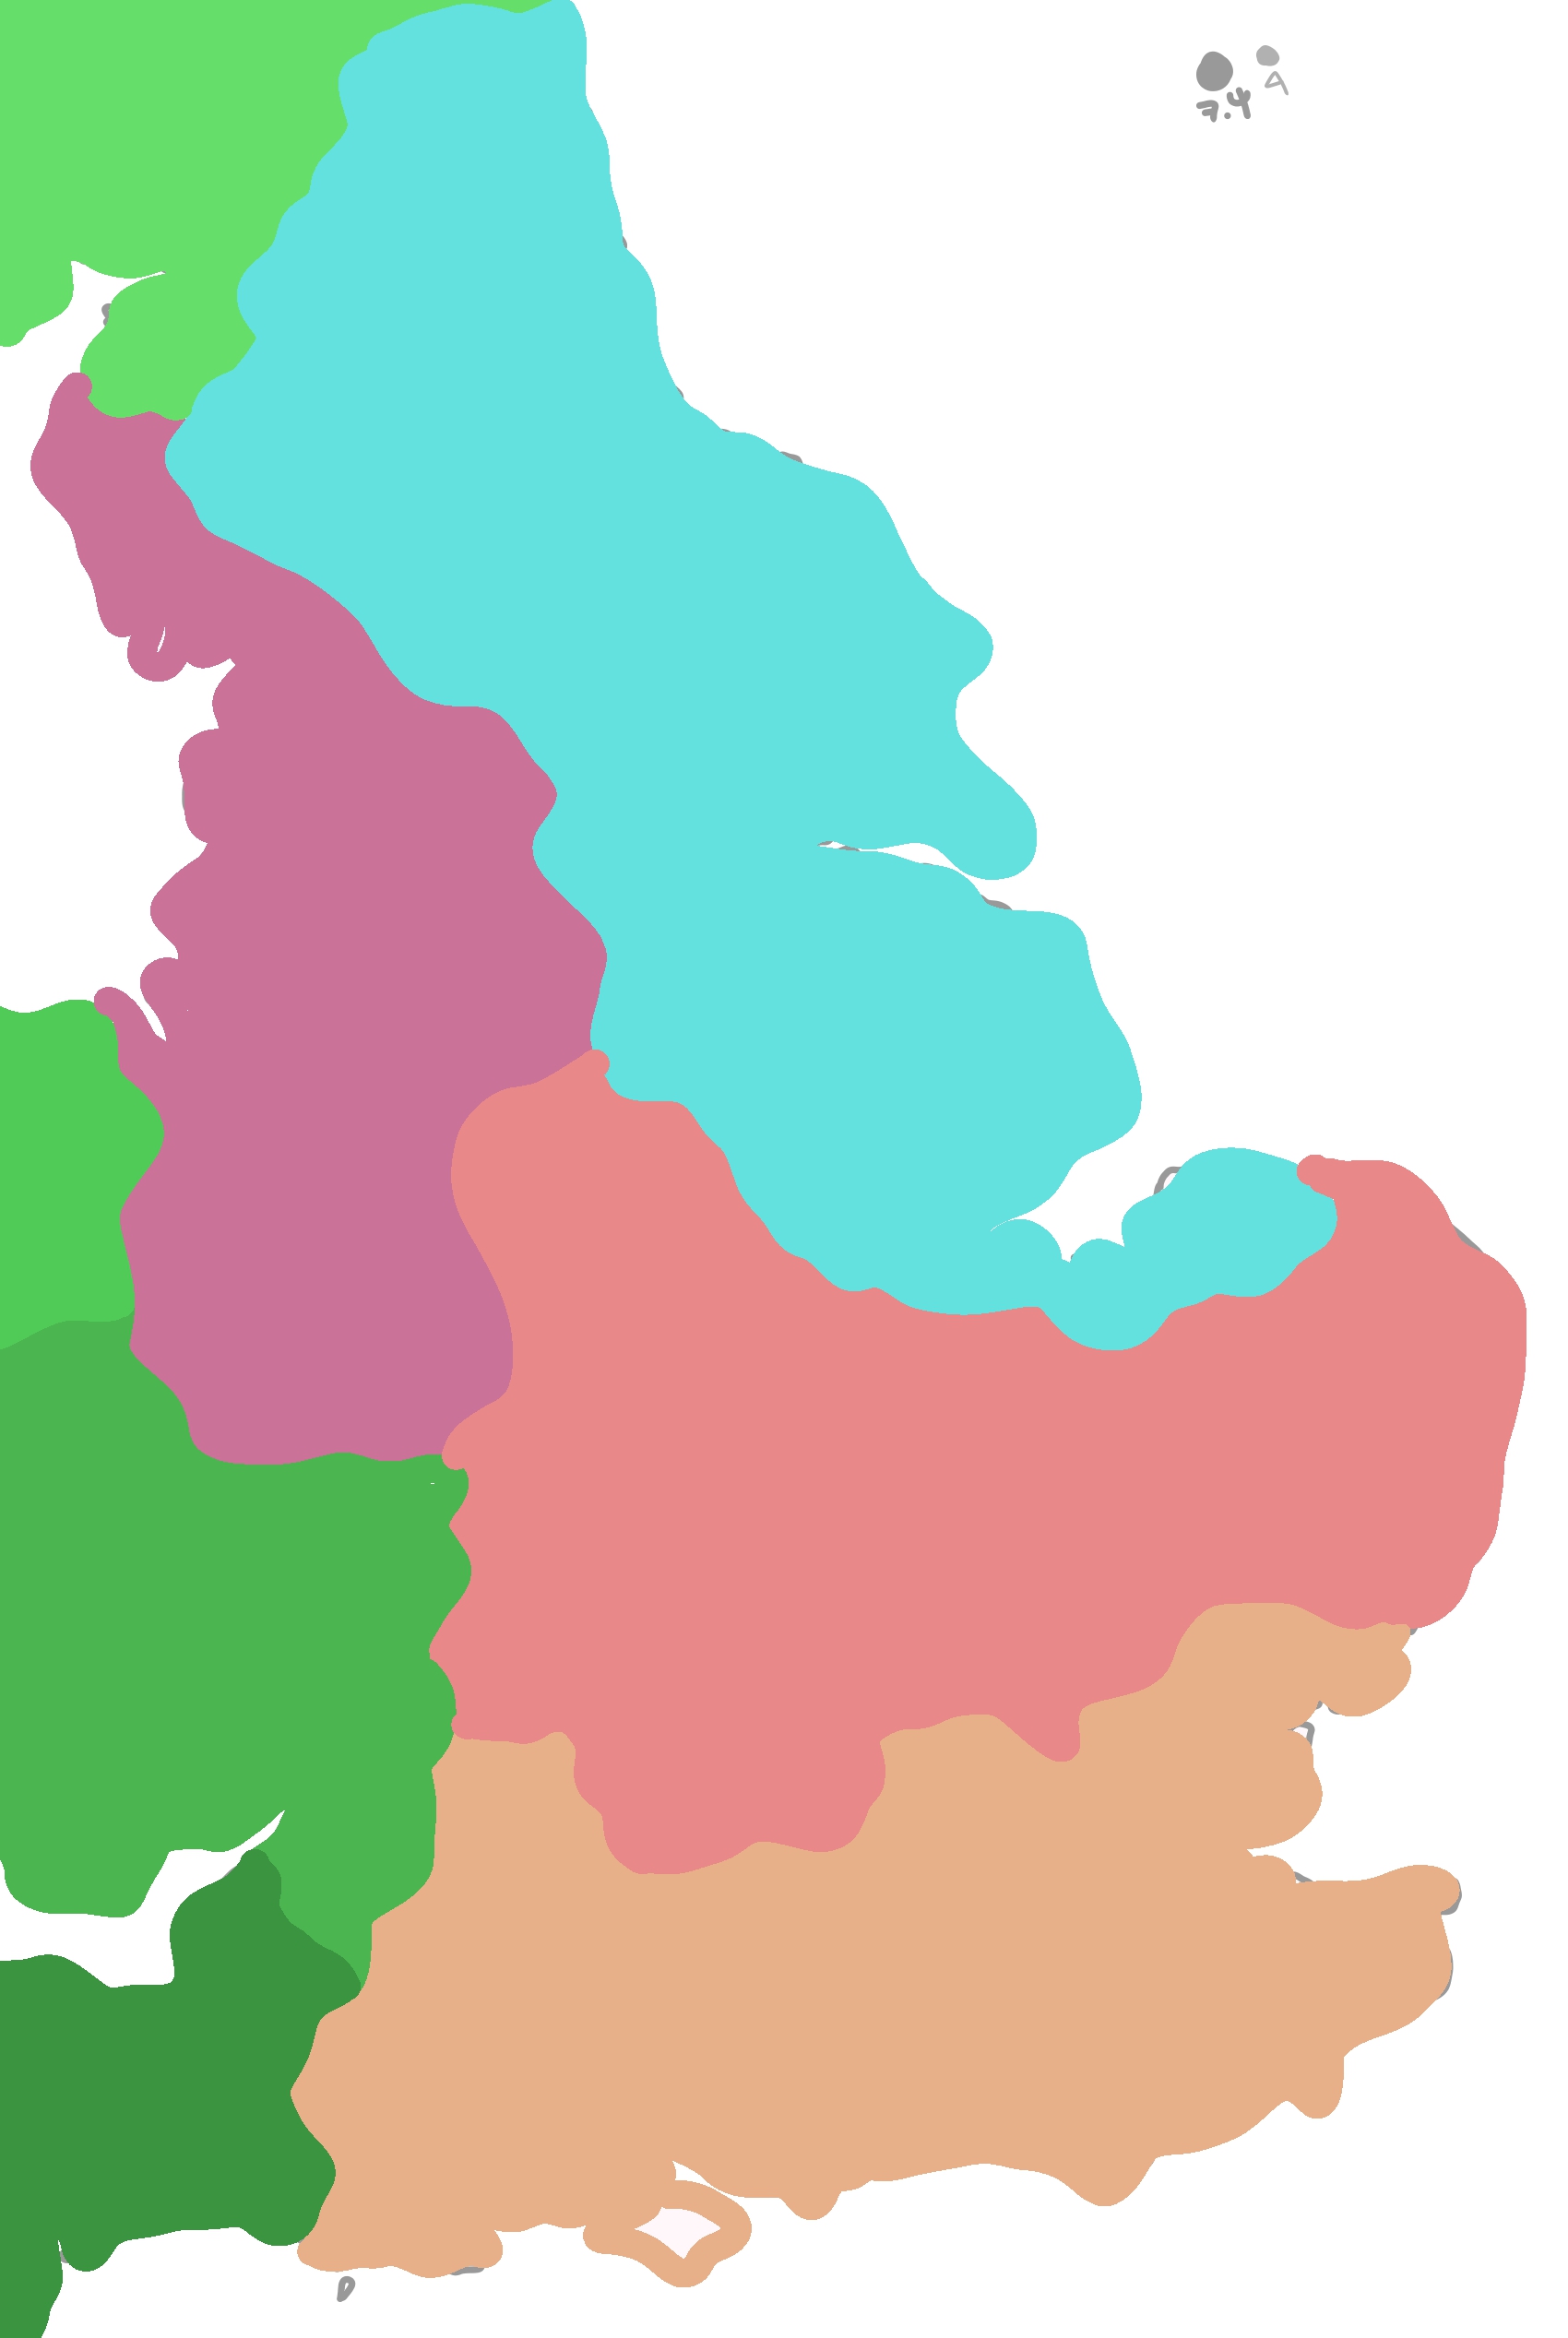 map-of-england-and-wales.jpg